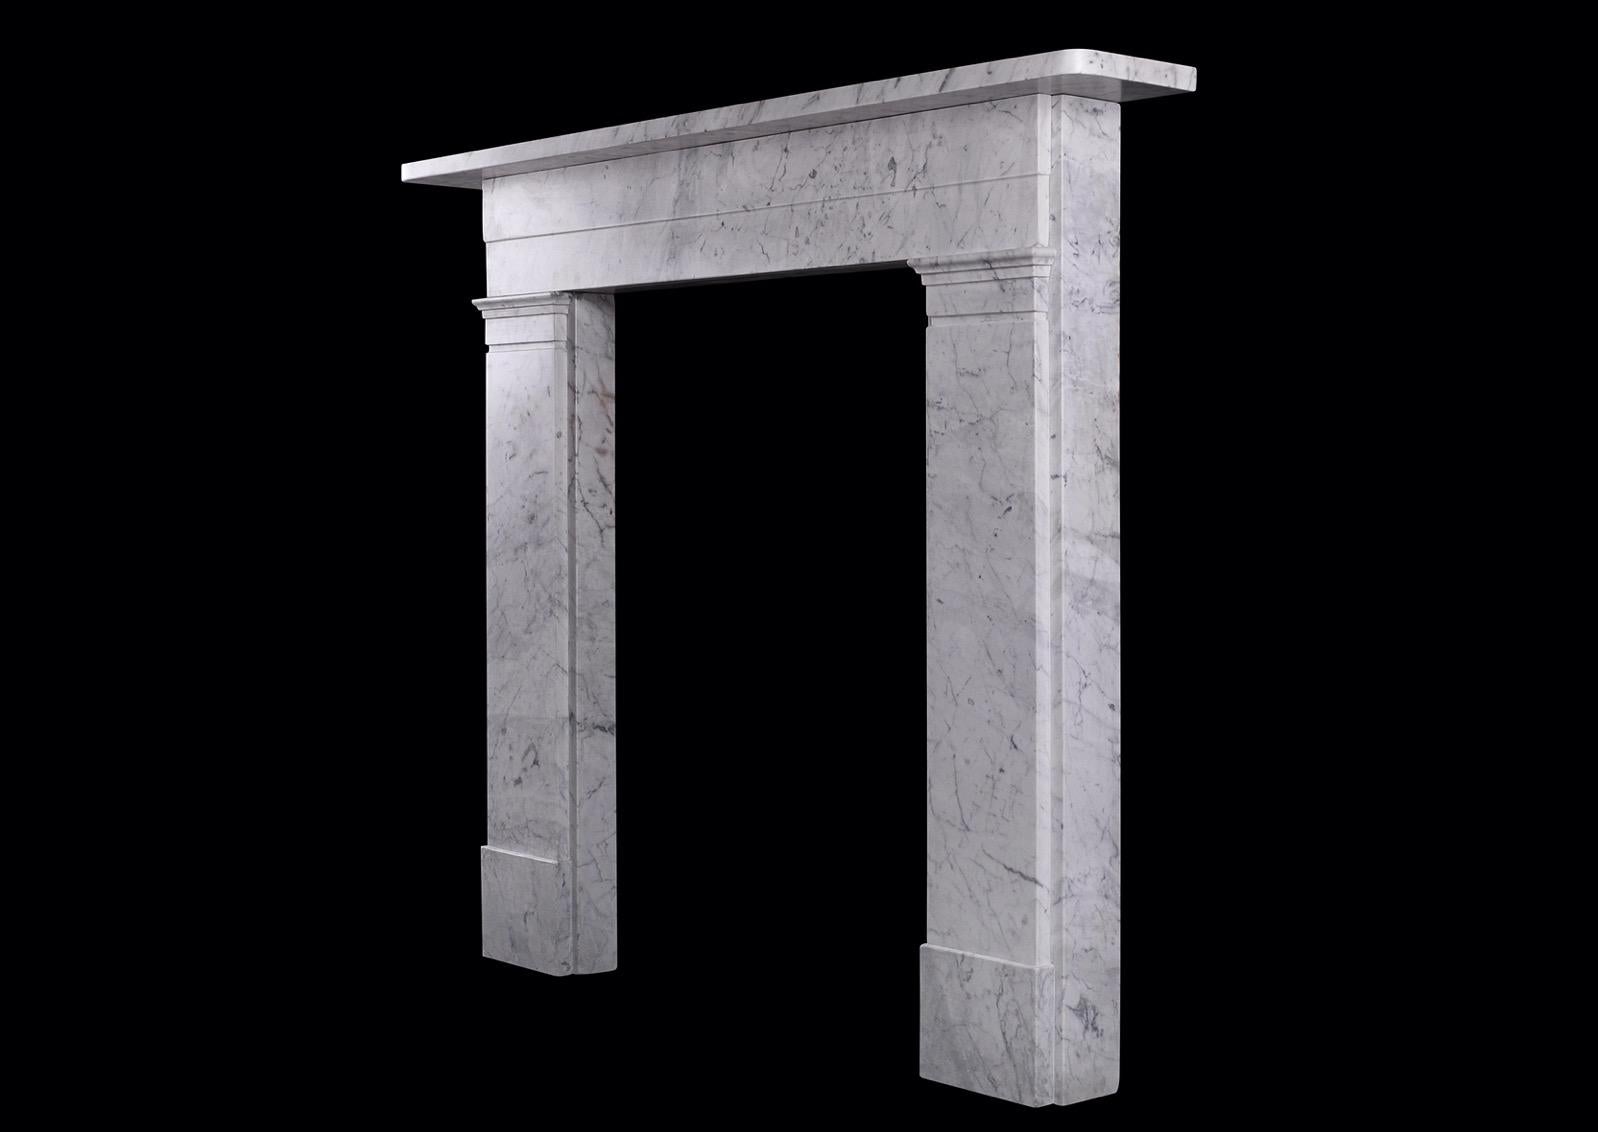 A period Victorian marble fireplace in Italian Carrara marble. The flat jambs surmounted by stepped frieze with plain shelf above. English, mid 19th century. A smaller version of Stock No. 4191.

Measures: Shelf width: 1366 mm 53 ¾